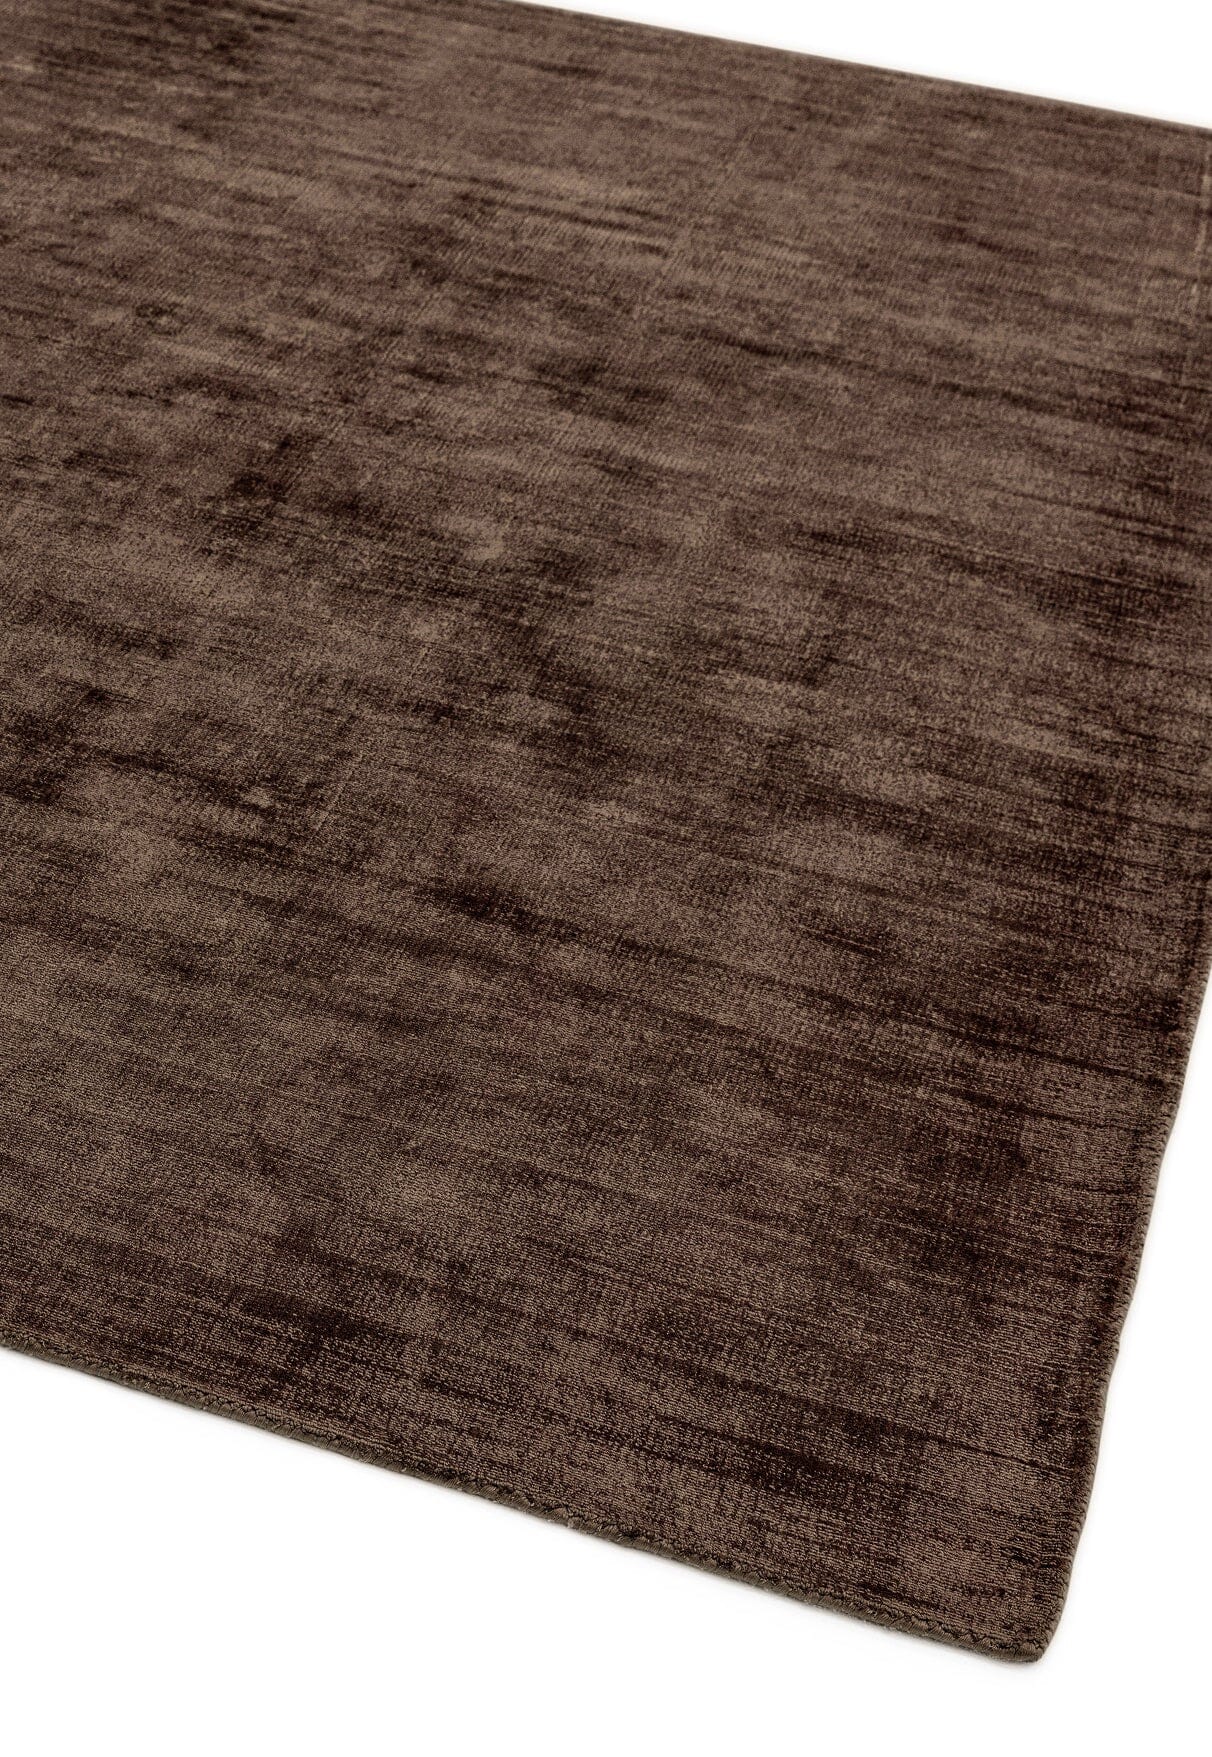  Asiatic Carpets-Asiatic Carpets Blade Hand Woven Rug Chocolate - 160 x 230cm-Brown 989 